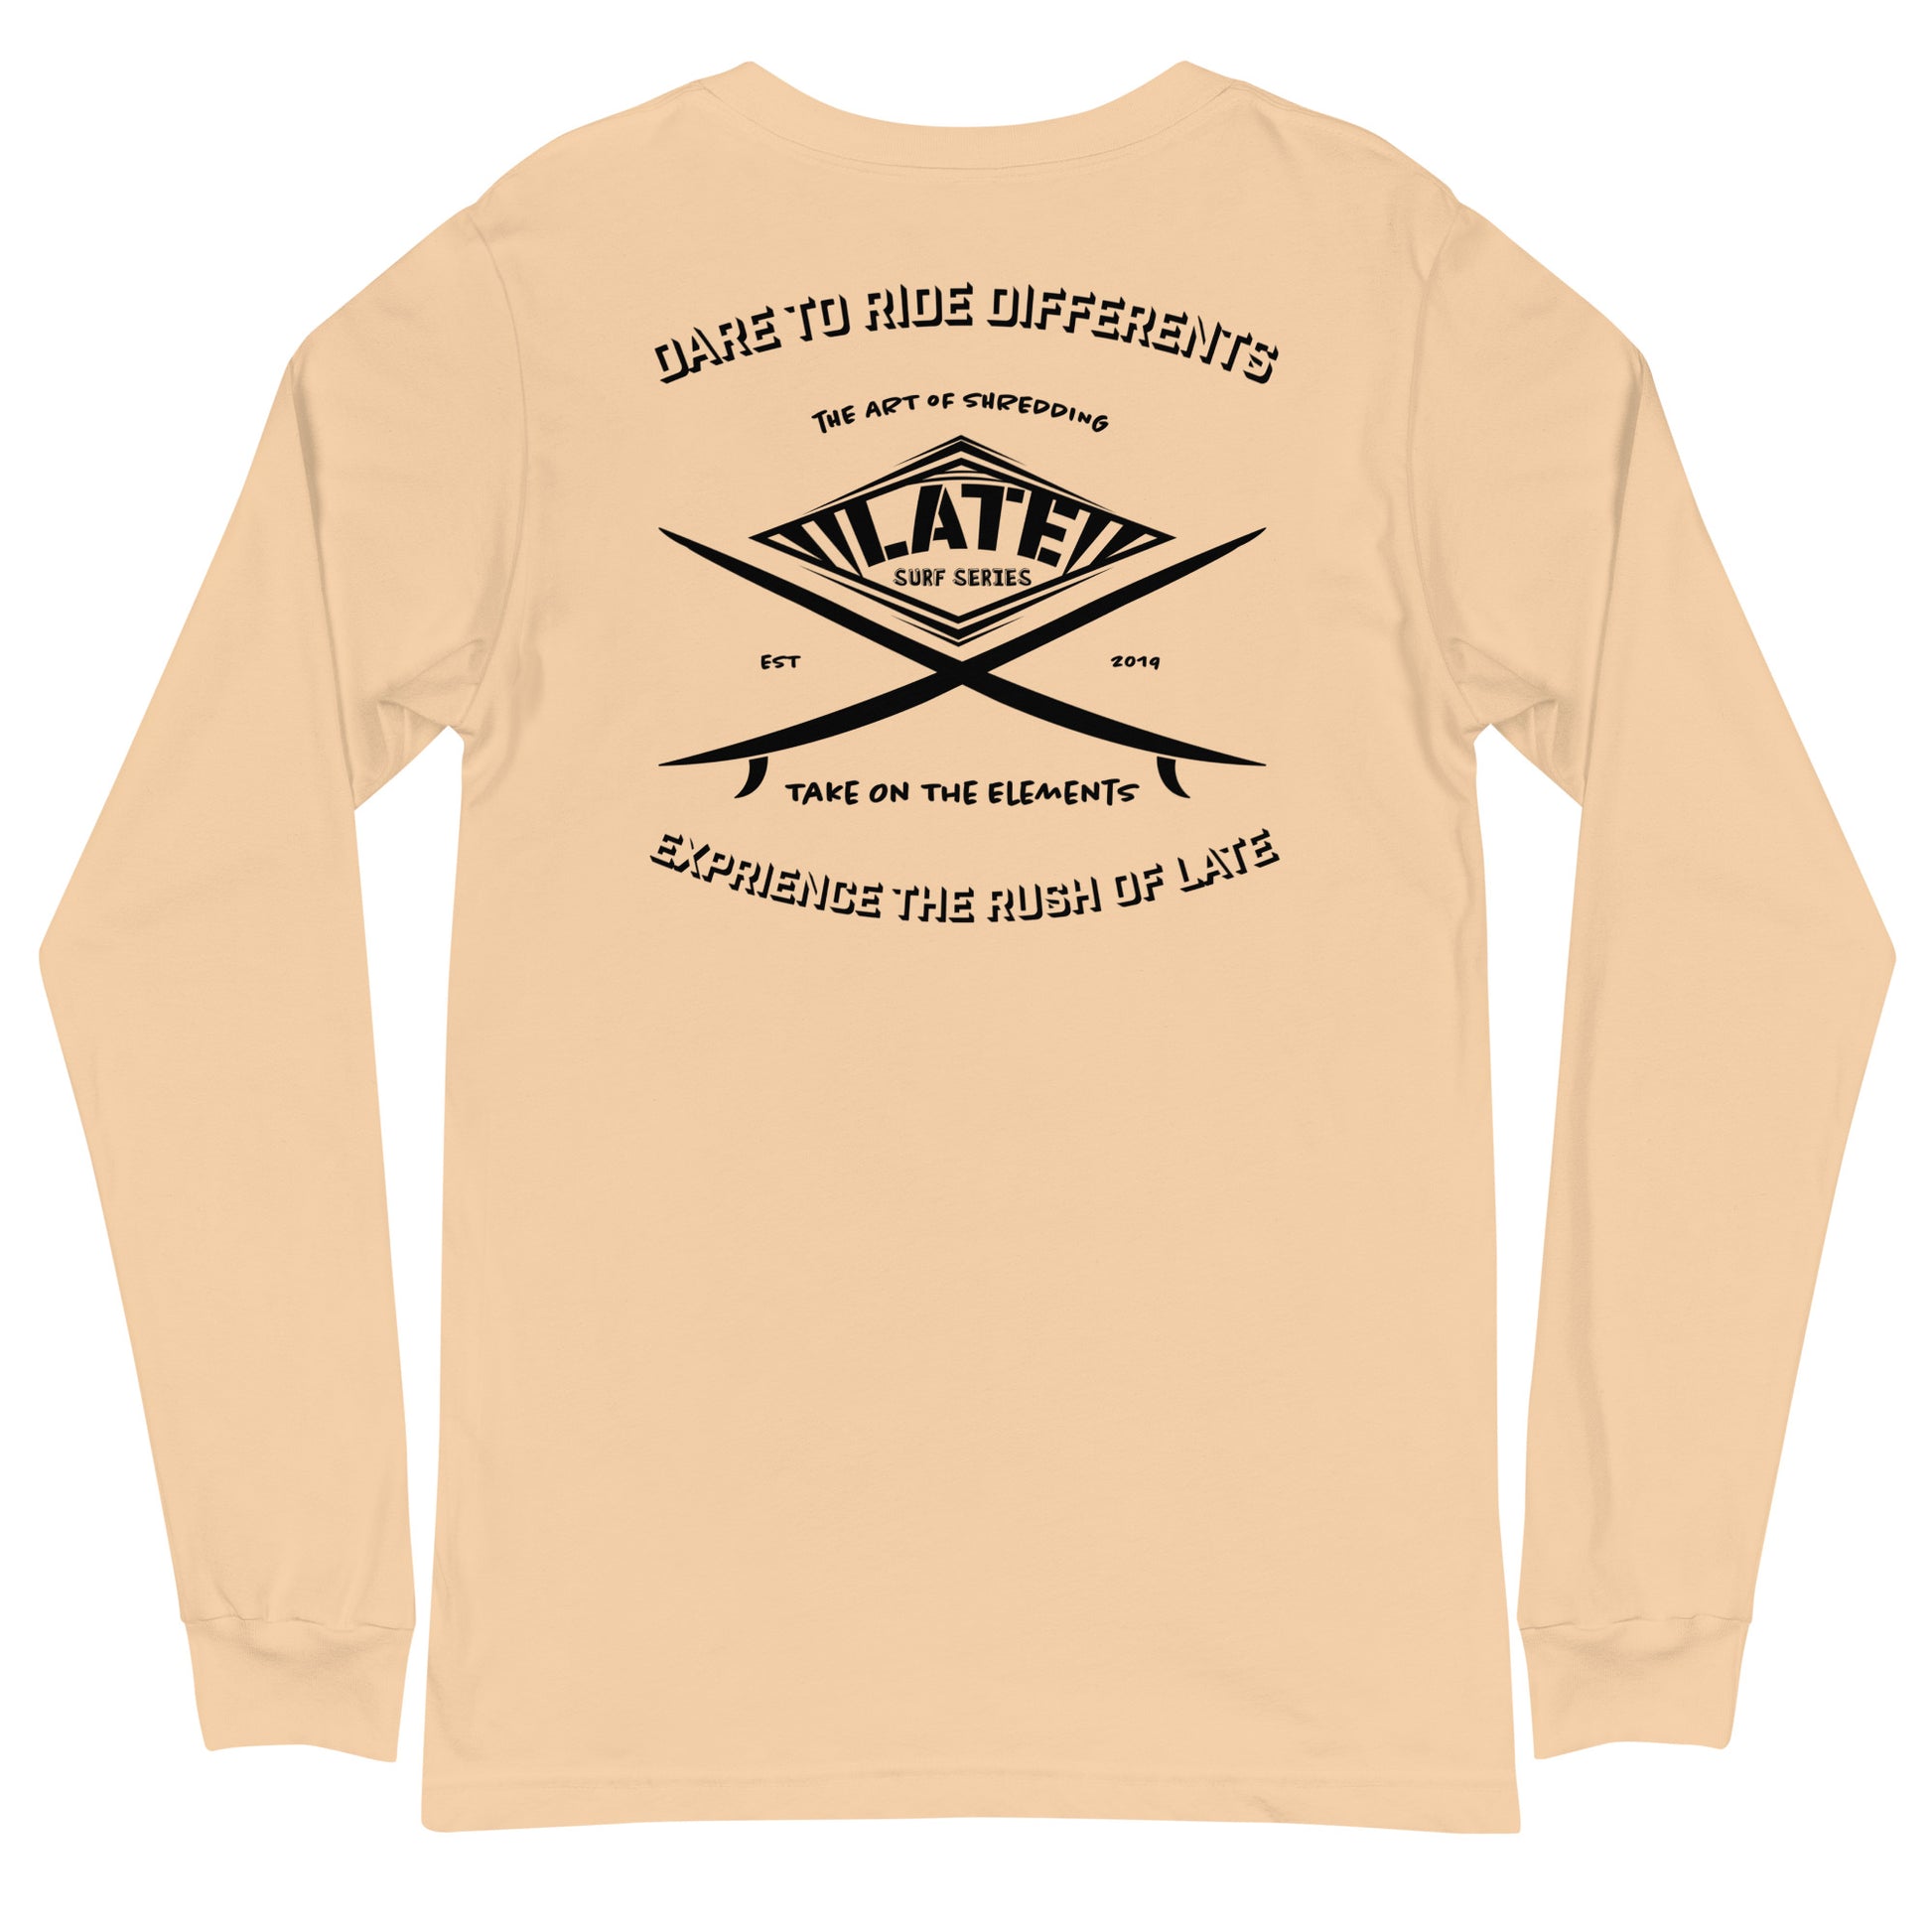 Long Sleeve surf vintage Take On The Elements Logo Late surf series, texte dare to ride differents couleur sable